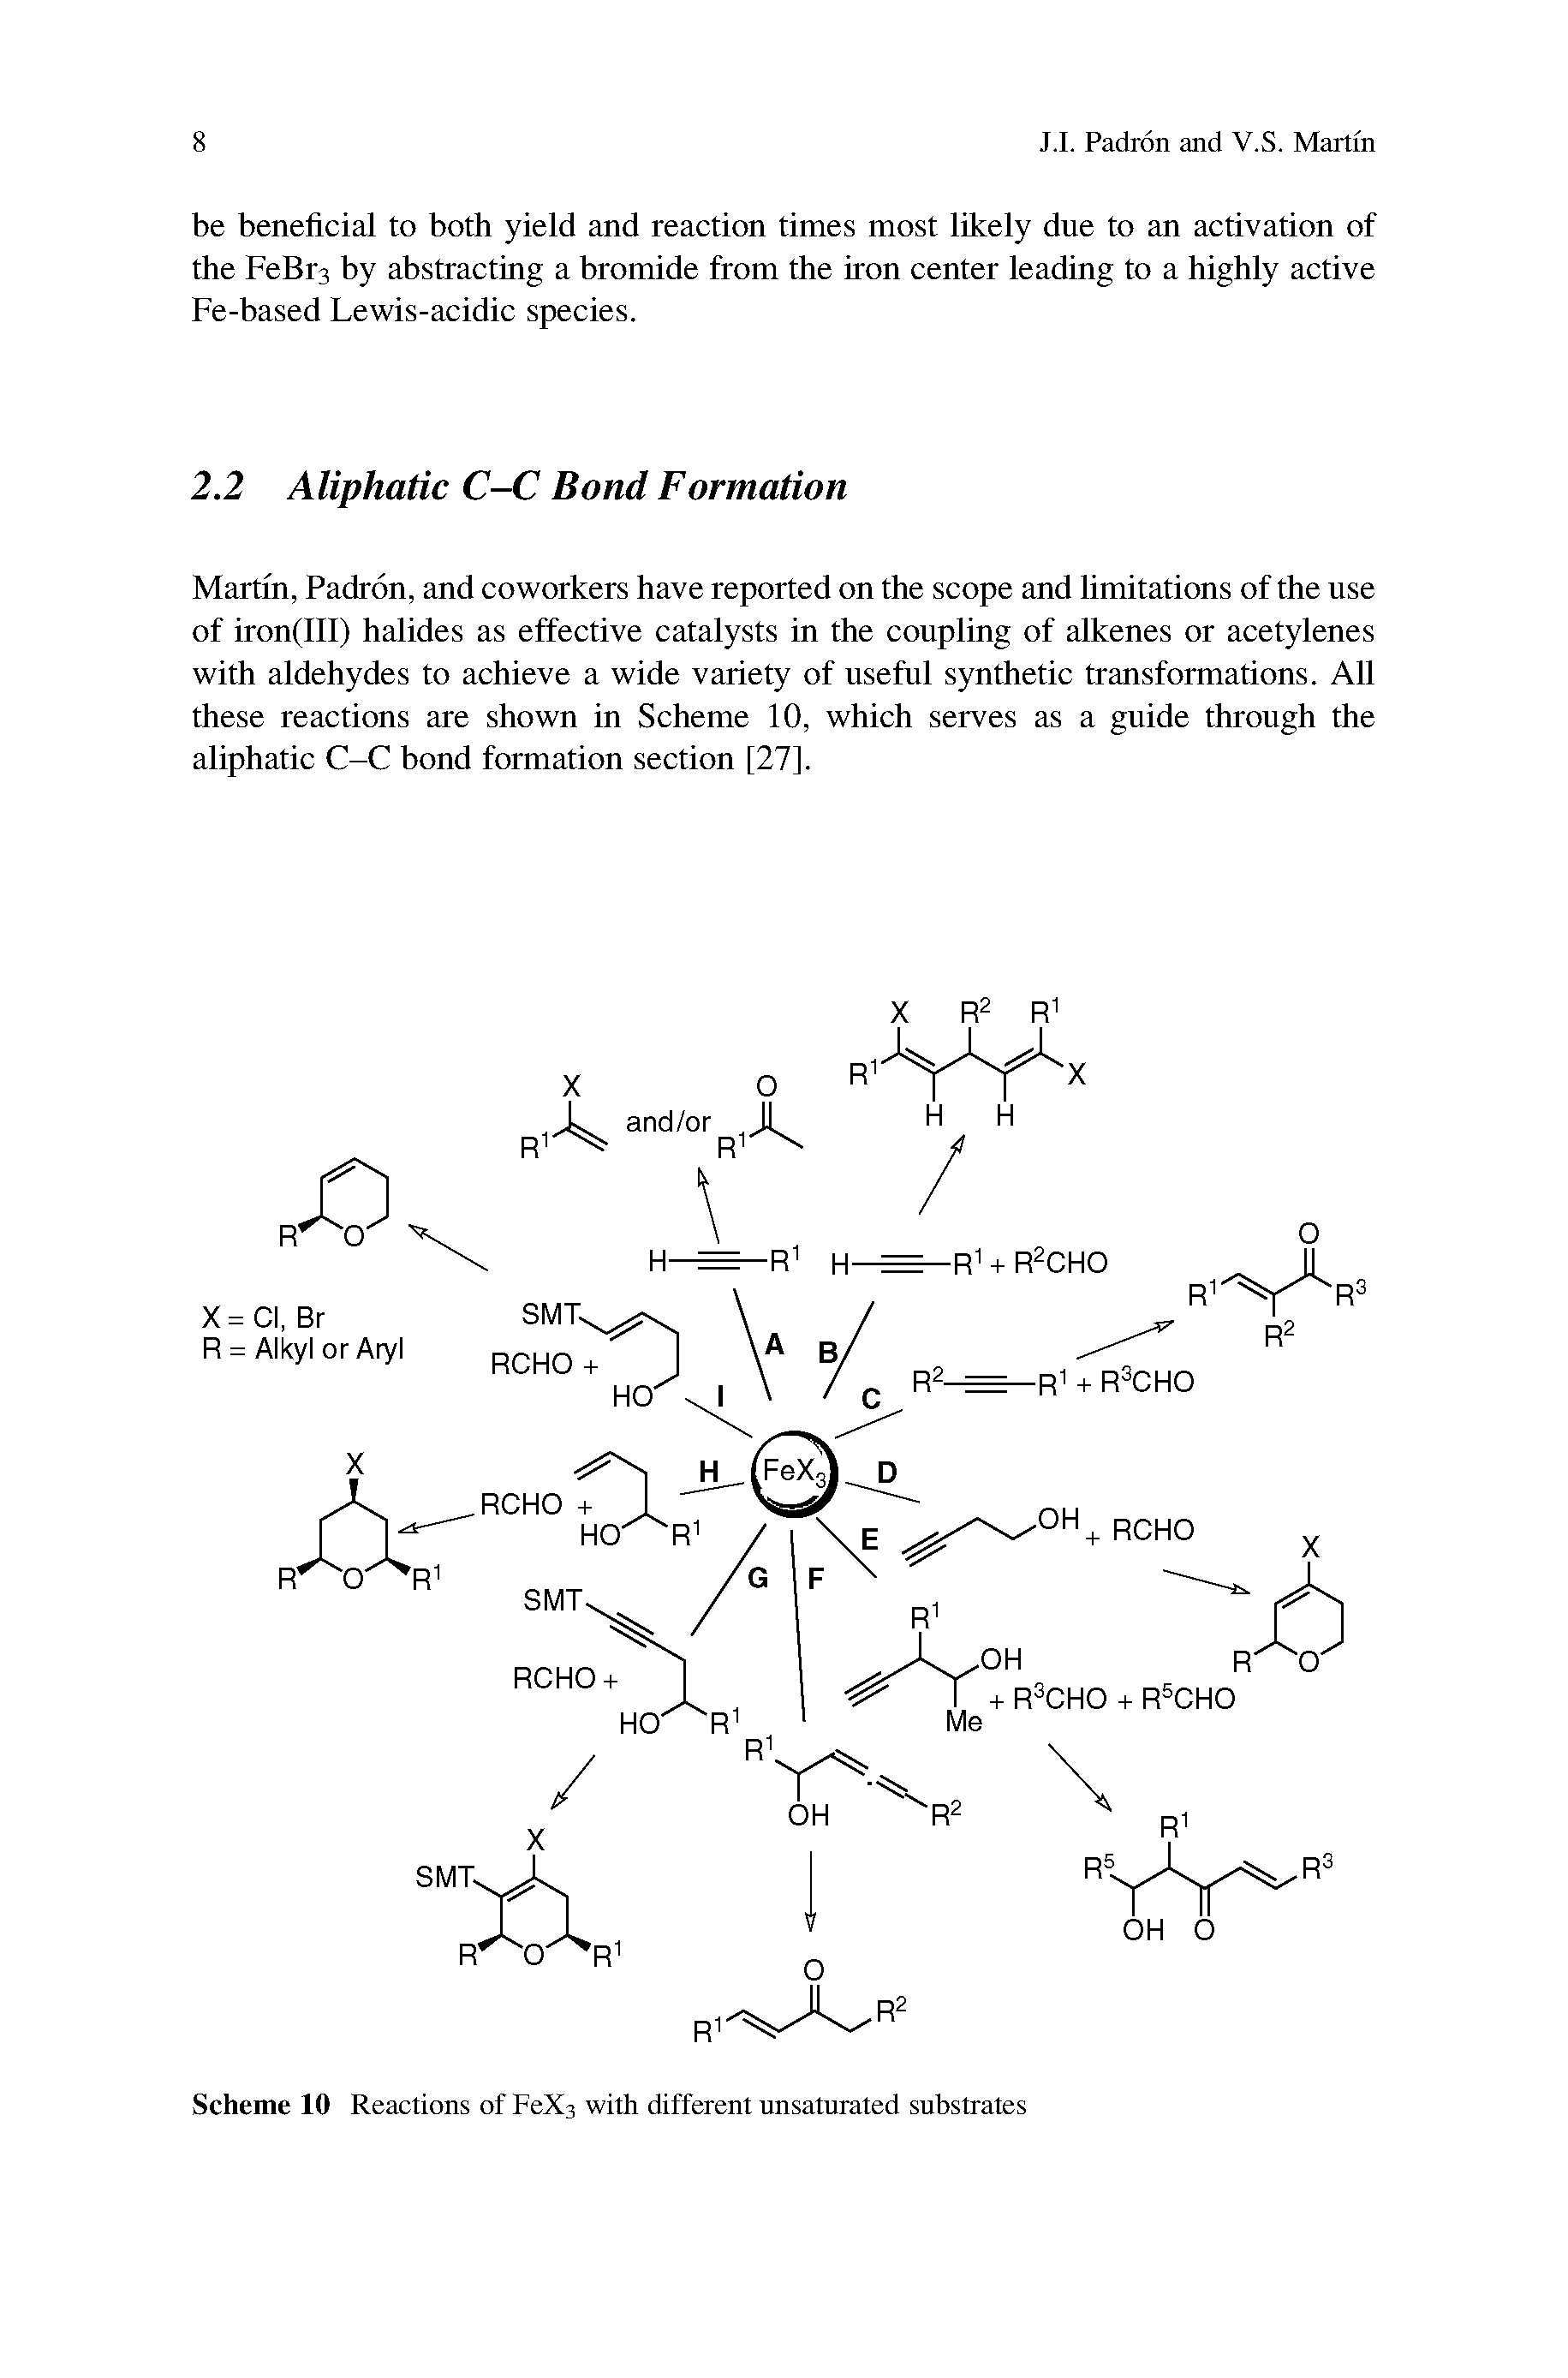 Scheme 10 Reactions of FeXs with different unsaturated substrates...